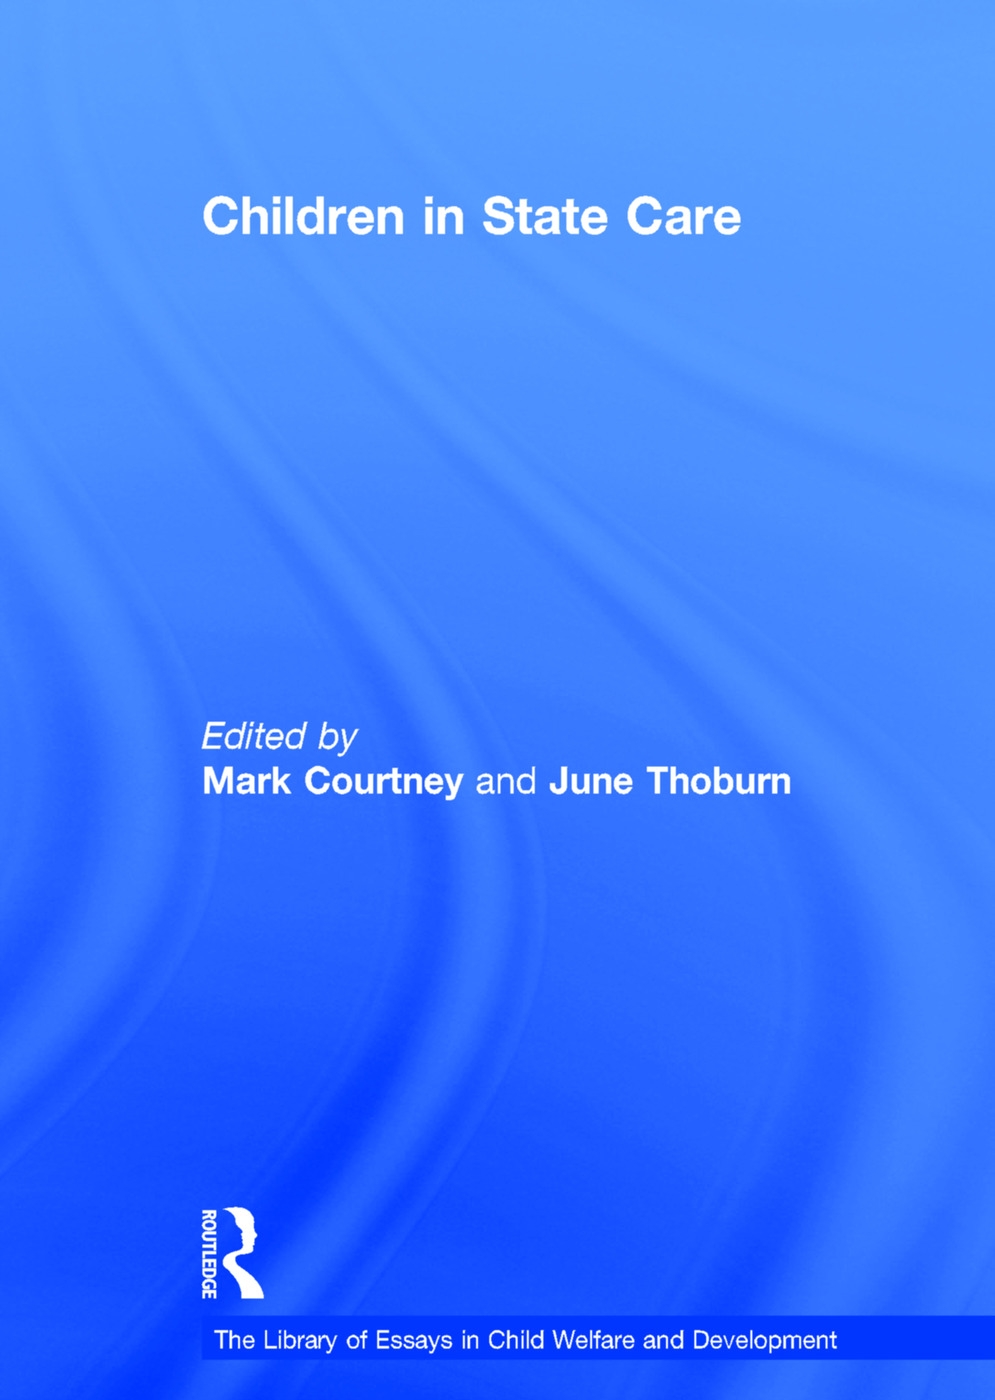 Children in State Care. Edited by Mark Courtney and June Thoburn